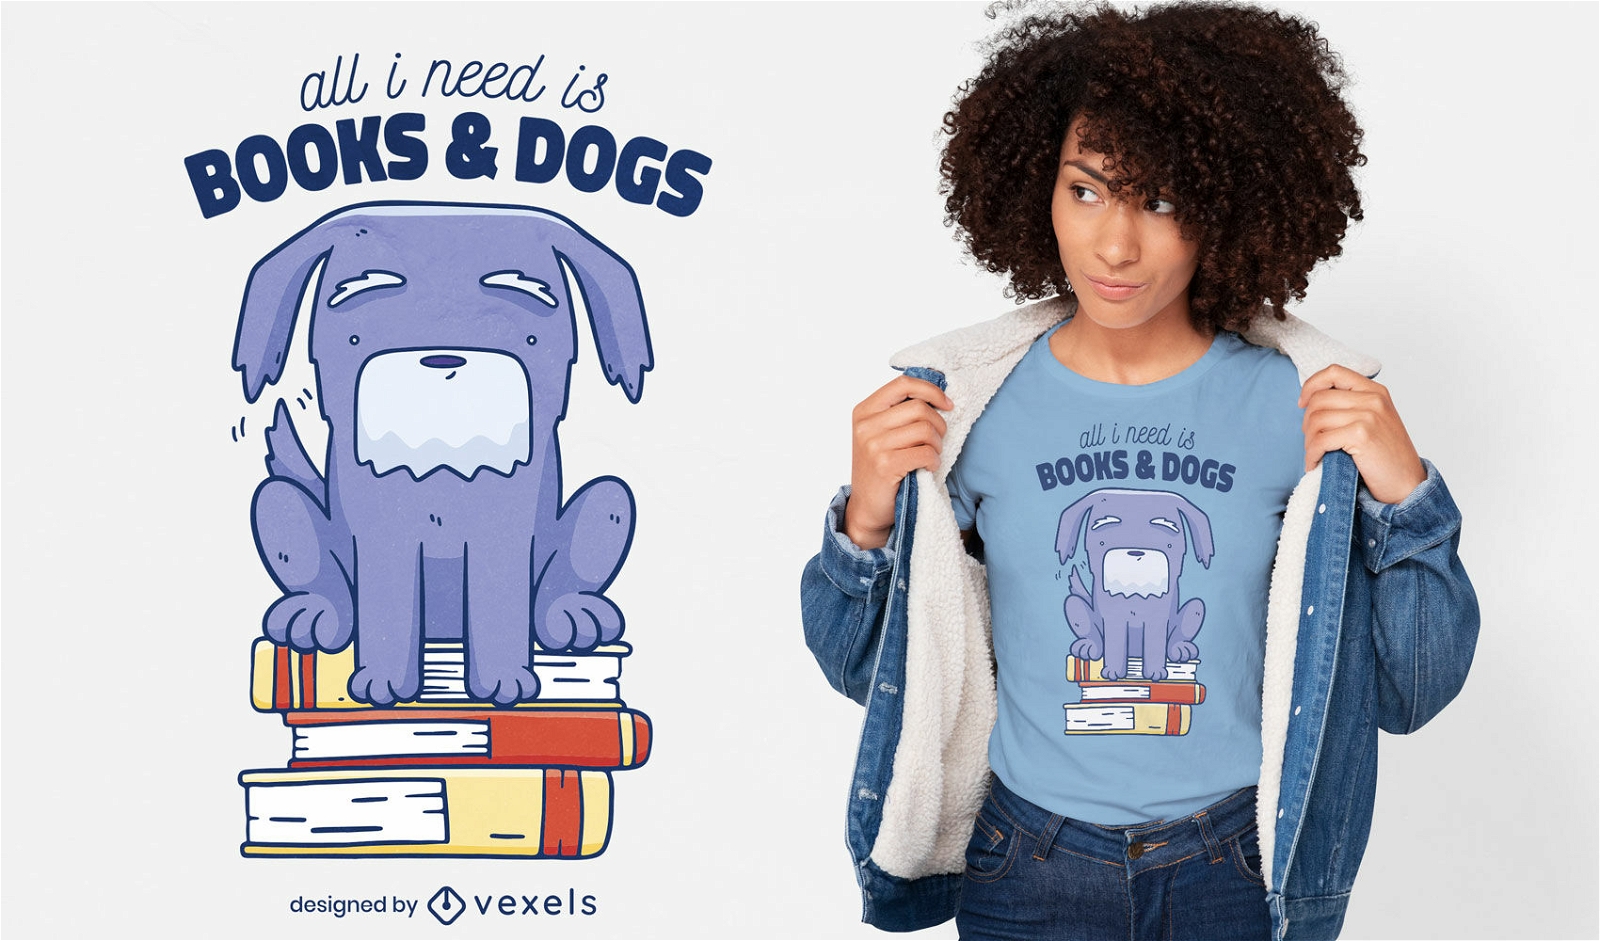 Books and dogs t-shirt design